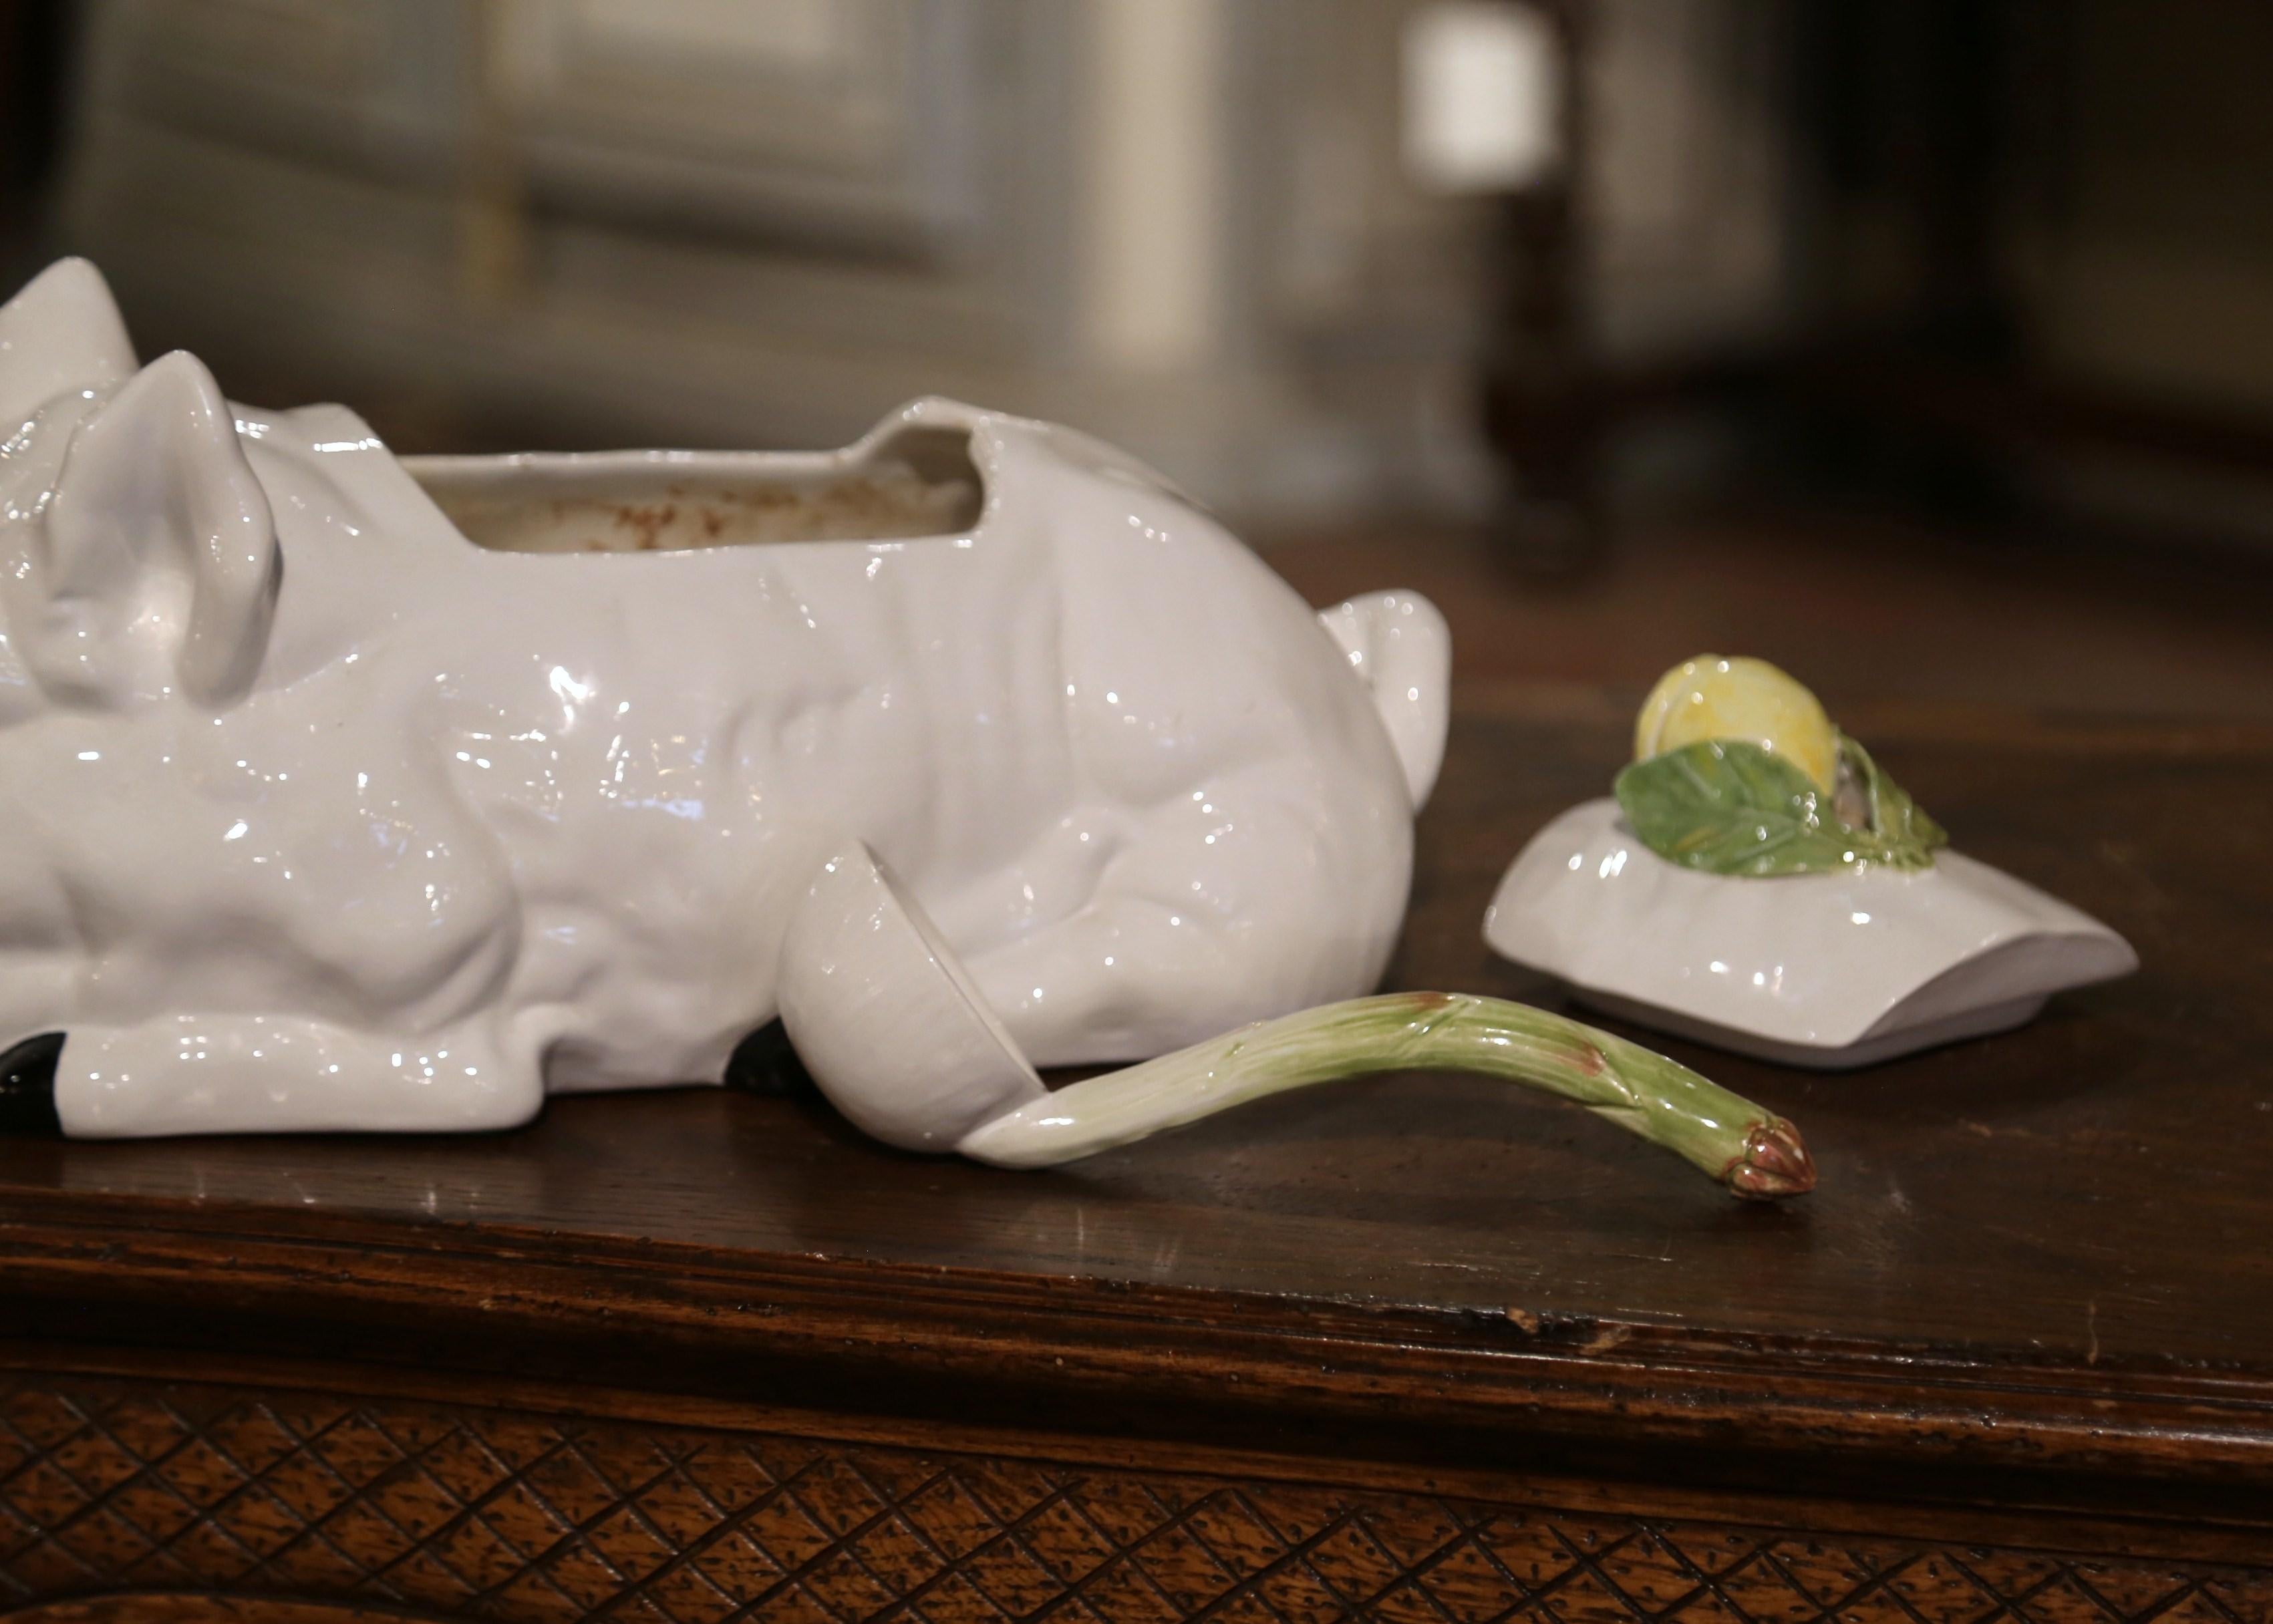 Vintage Italian Majolica Porcelain Pig-Form Soup Tureen with Lid and Ladle For Sale 6